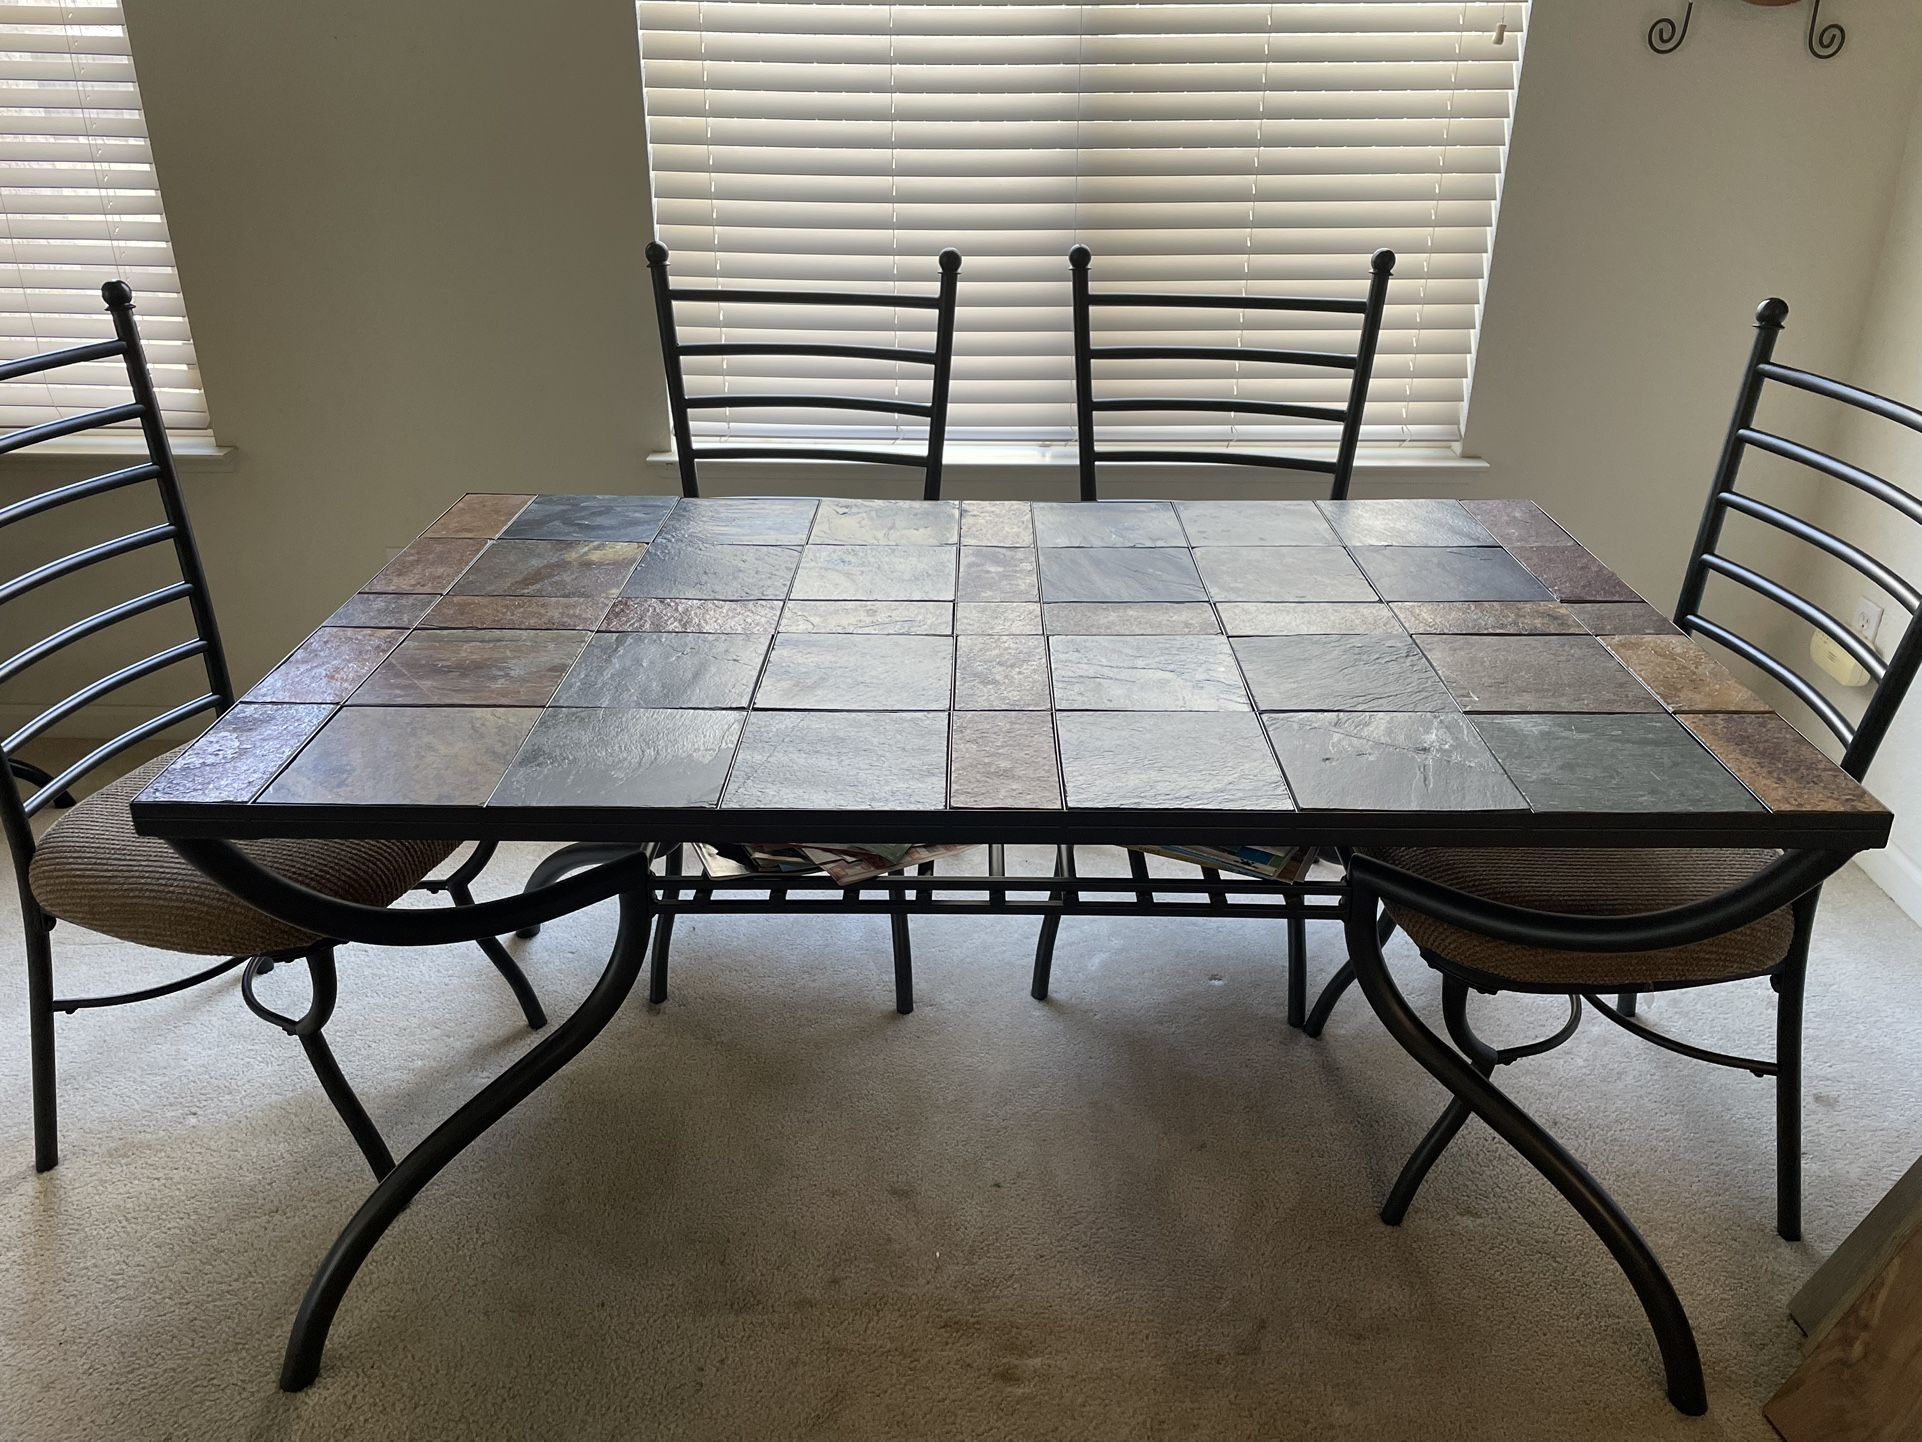 Tile Style 10 Pc Dining Set, Coffee Table, End Tables, Bar Chairs